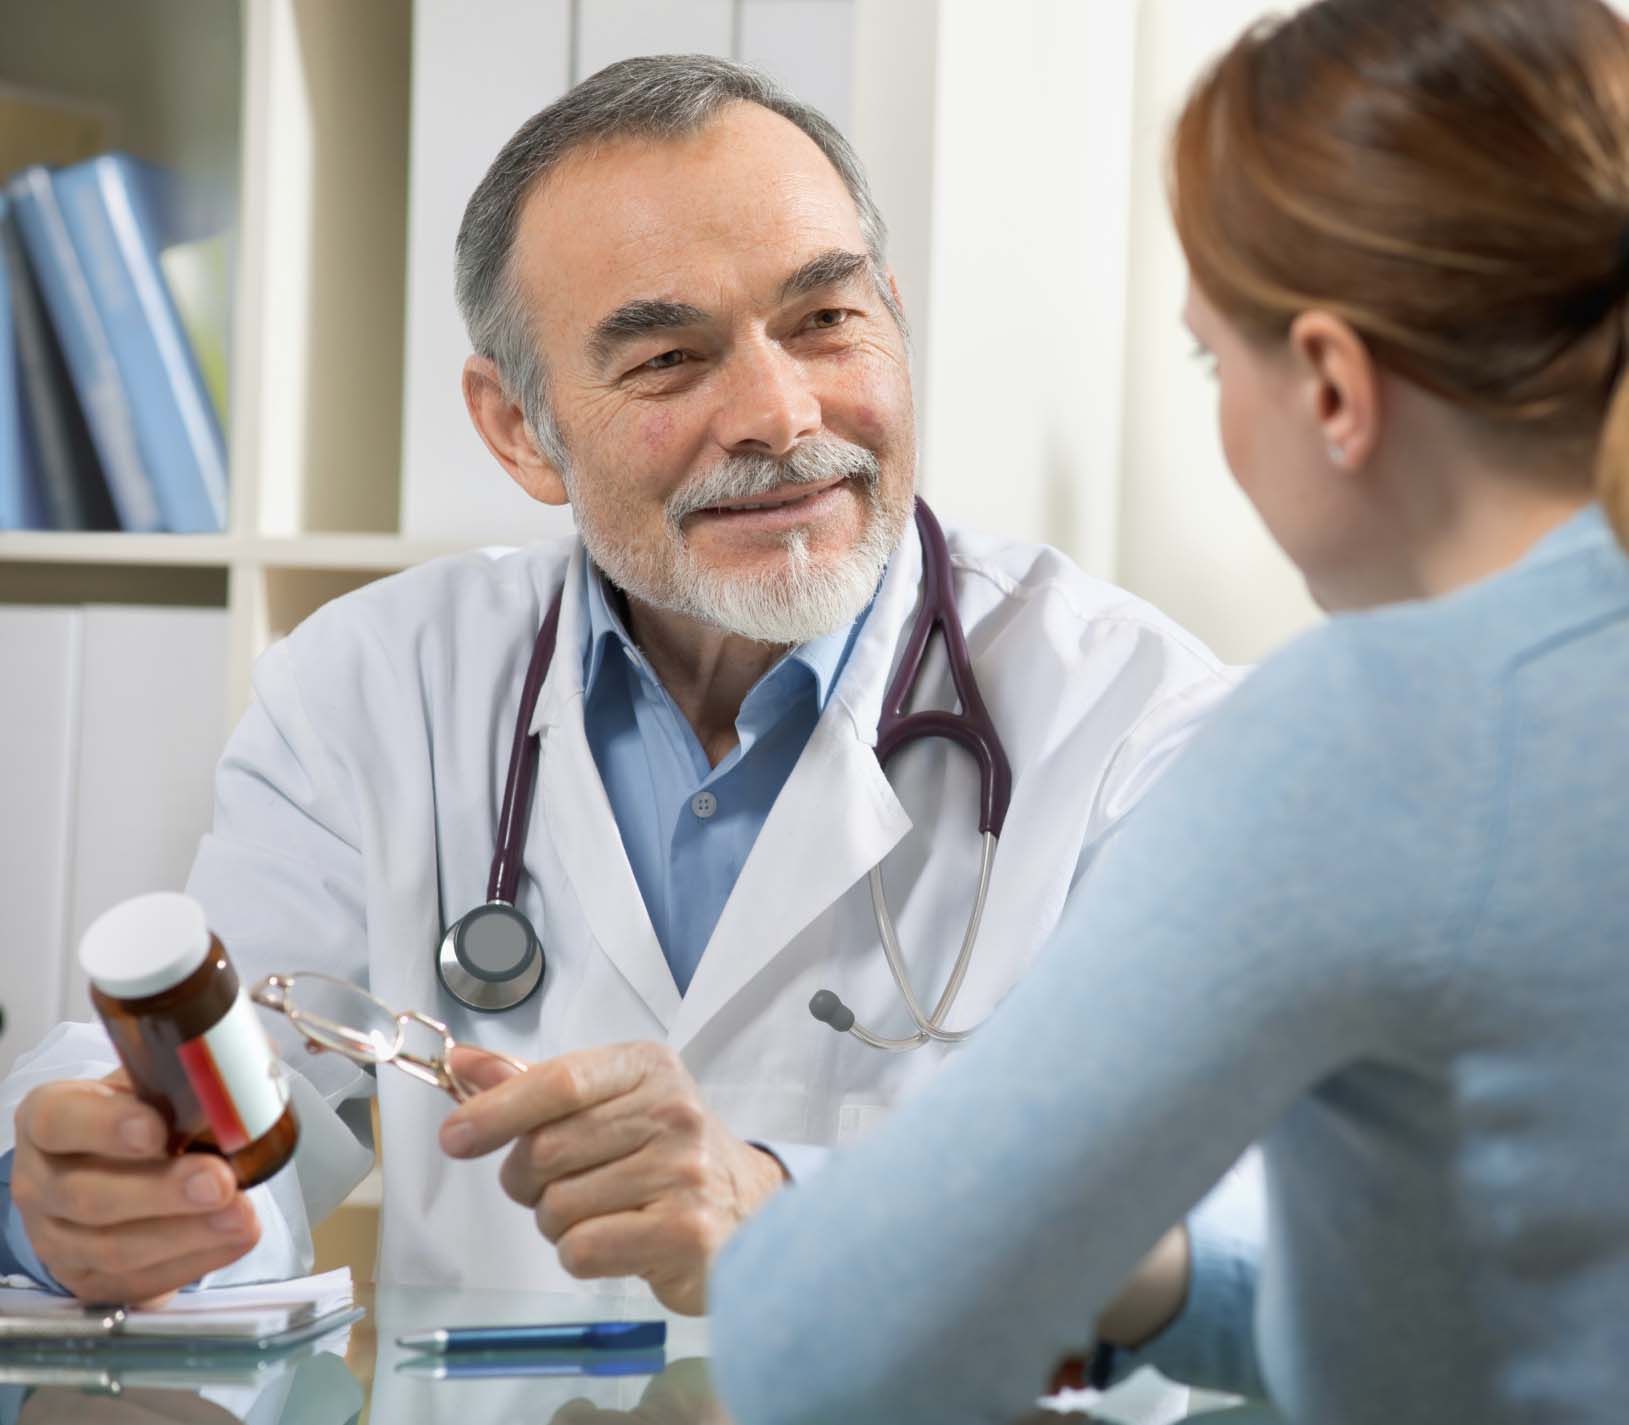 How Physician Website Can Help Build Relationship with Patients